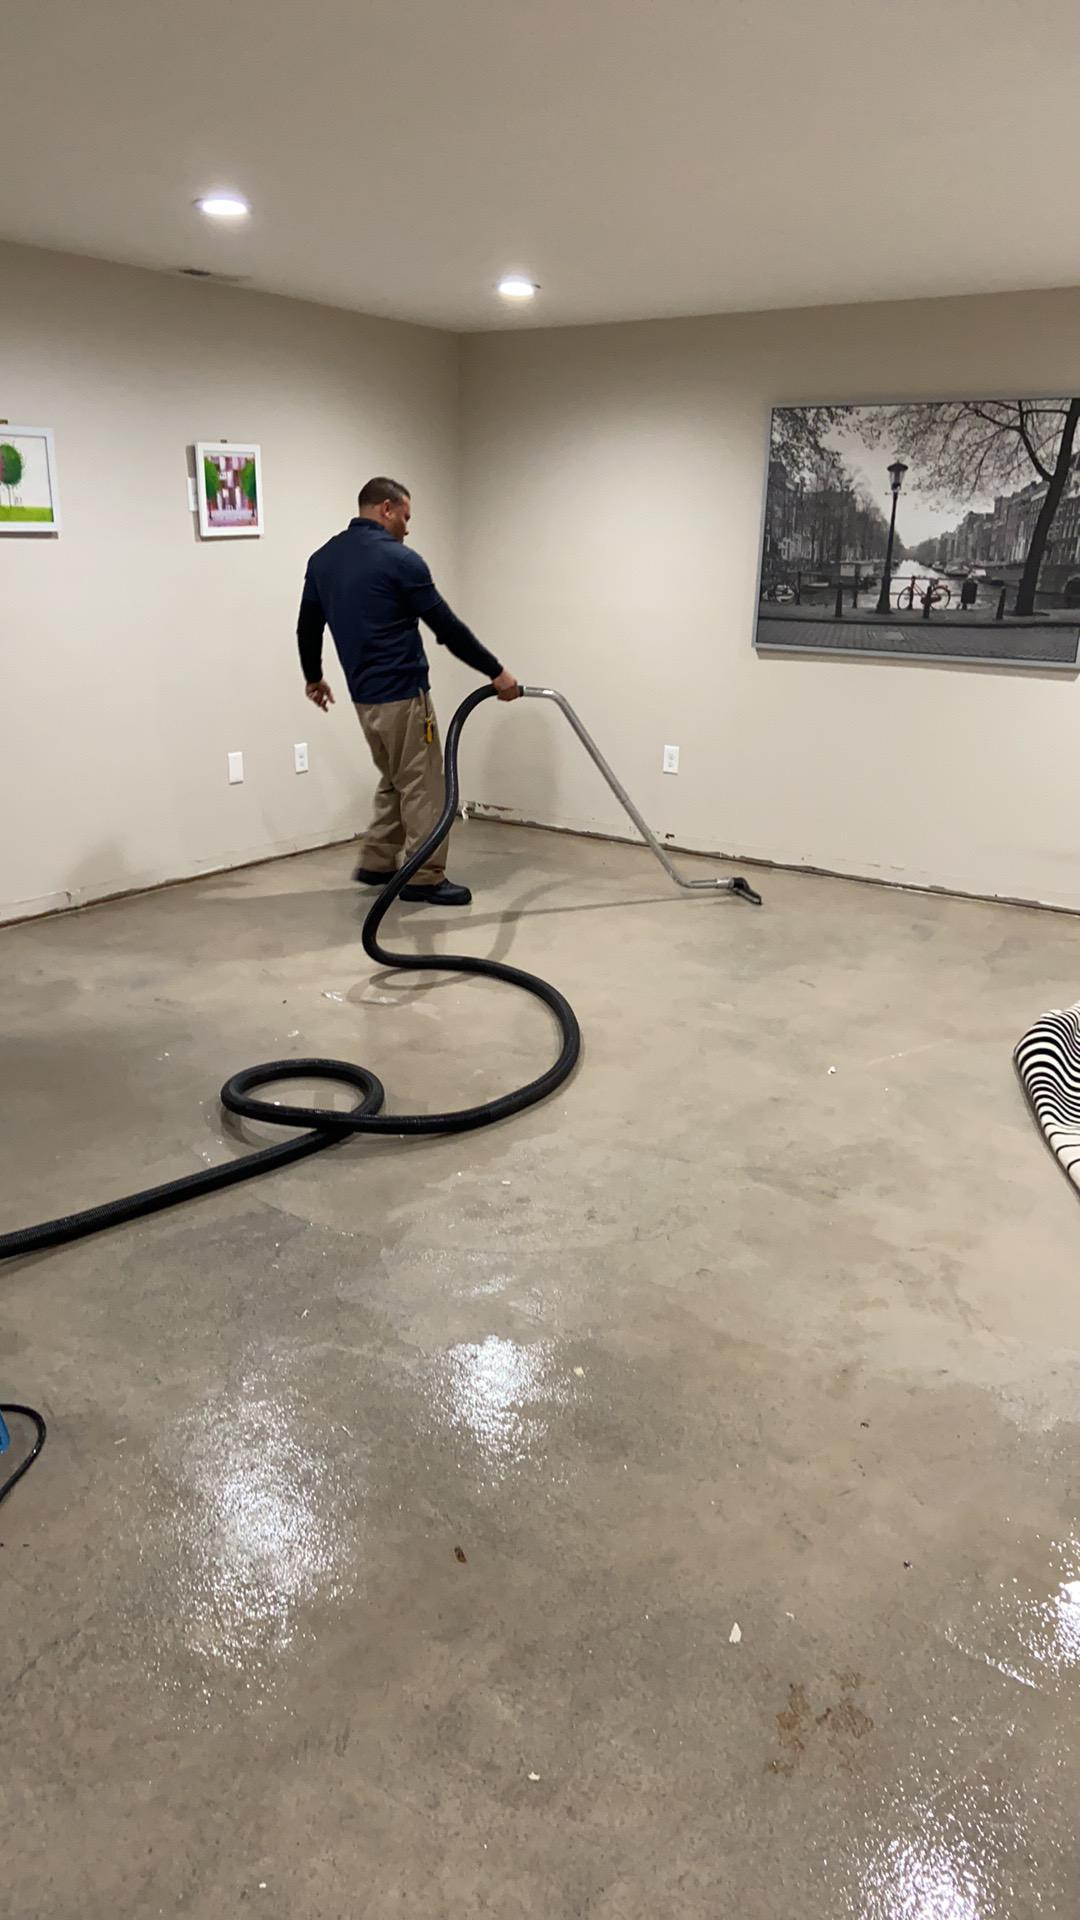 Cleaning up water damage